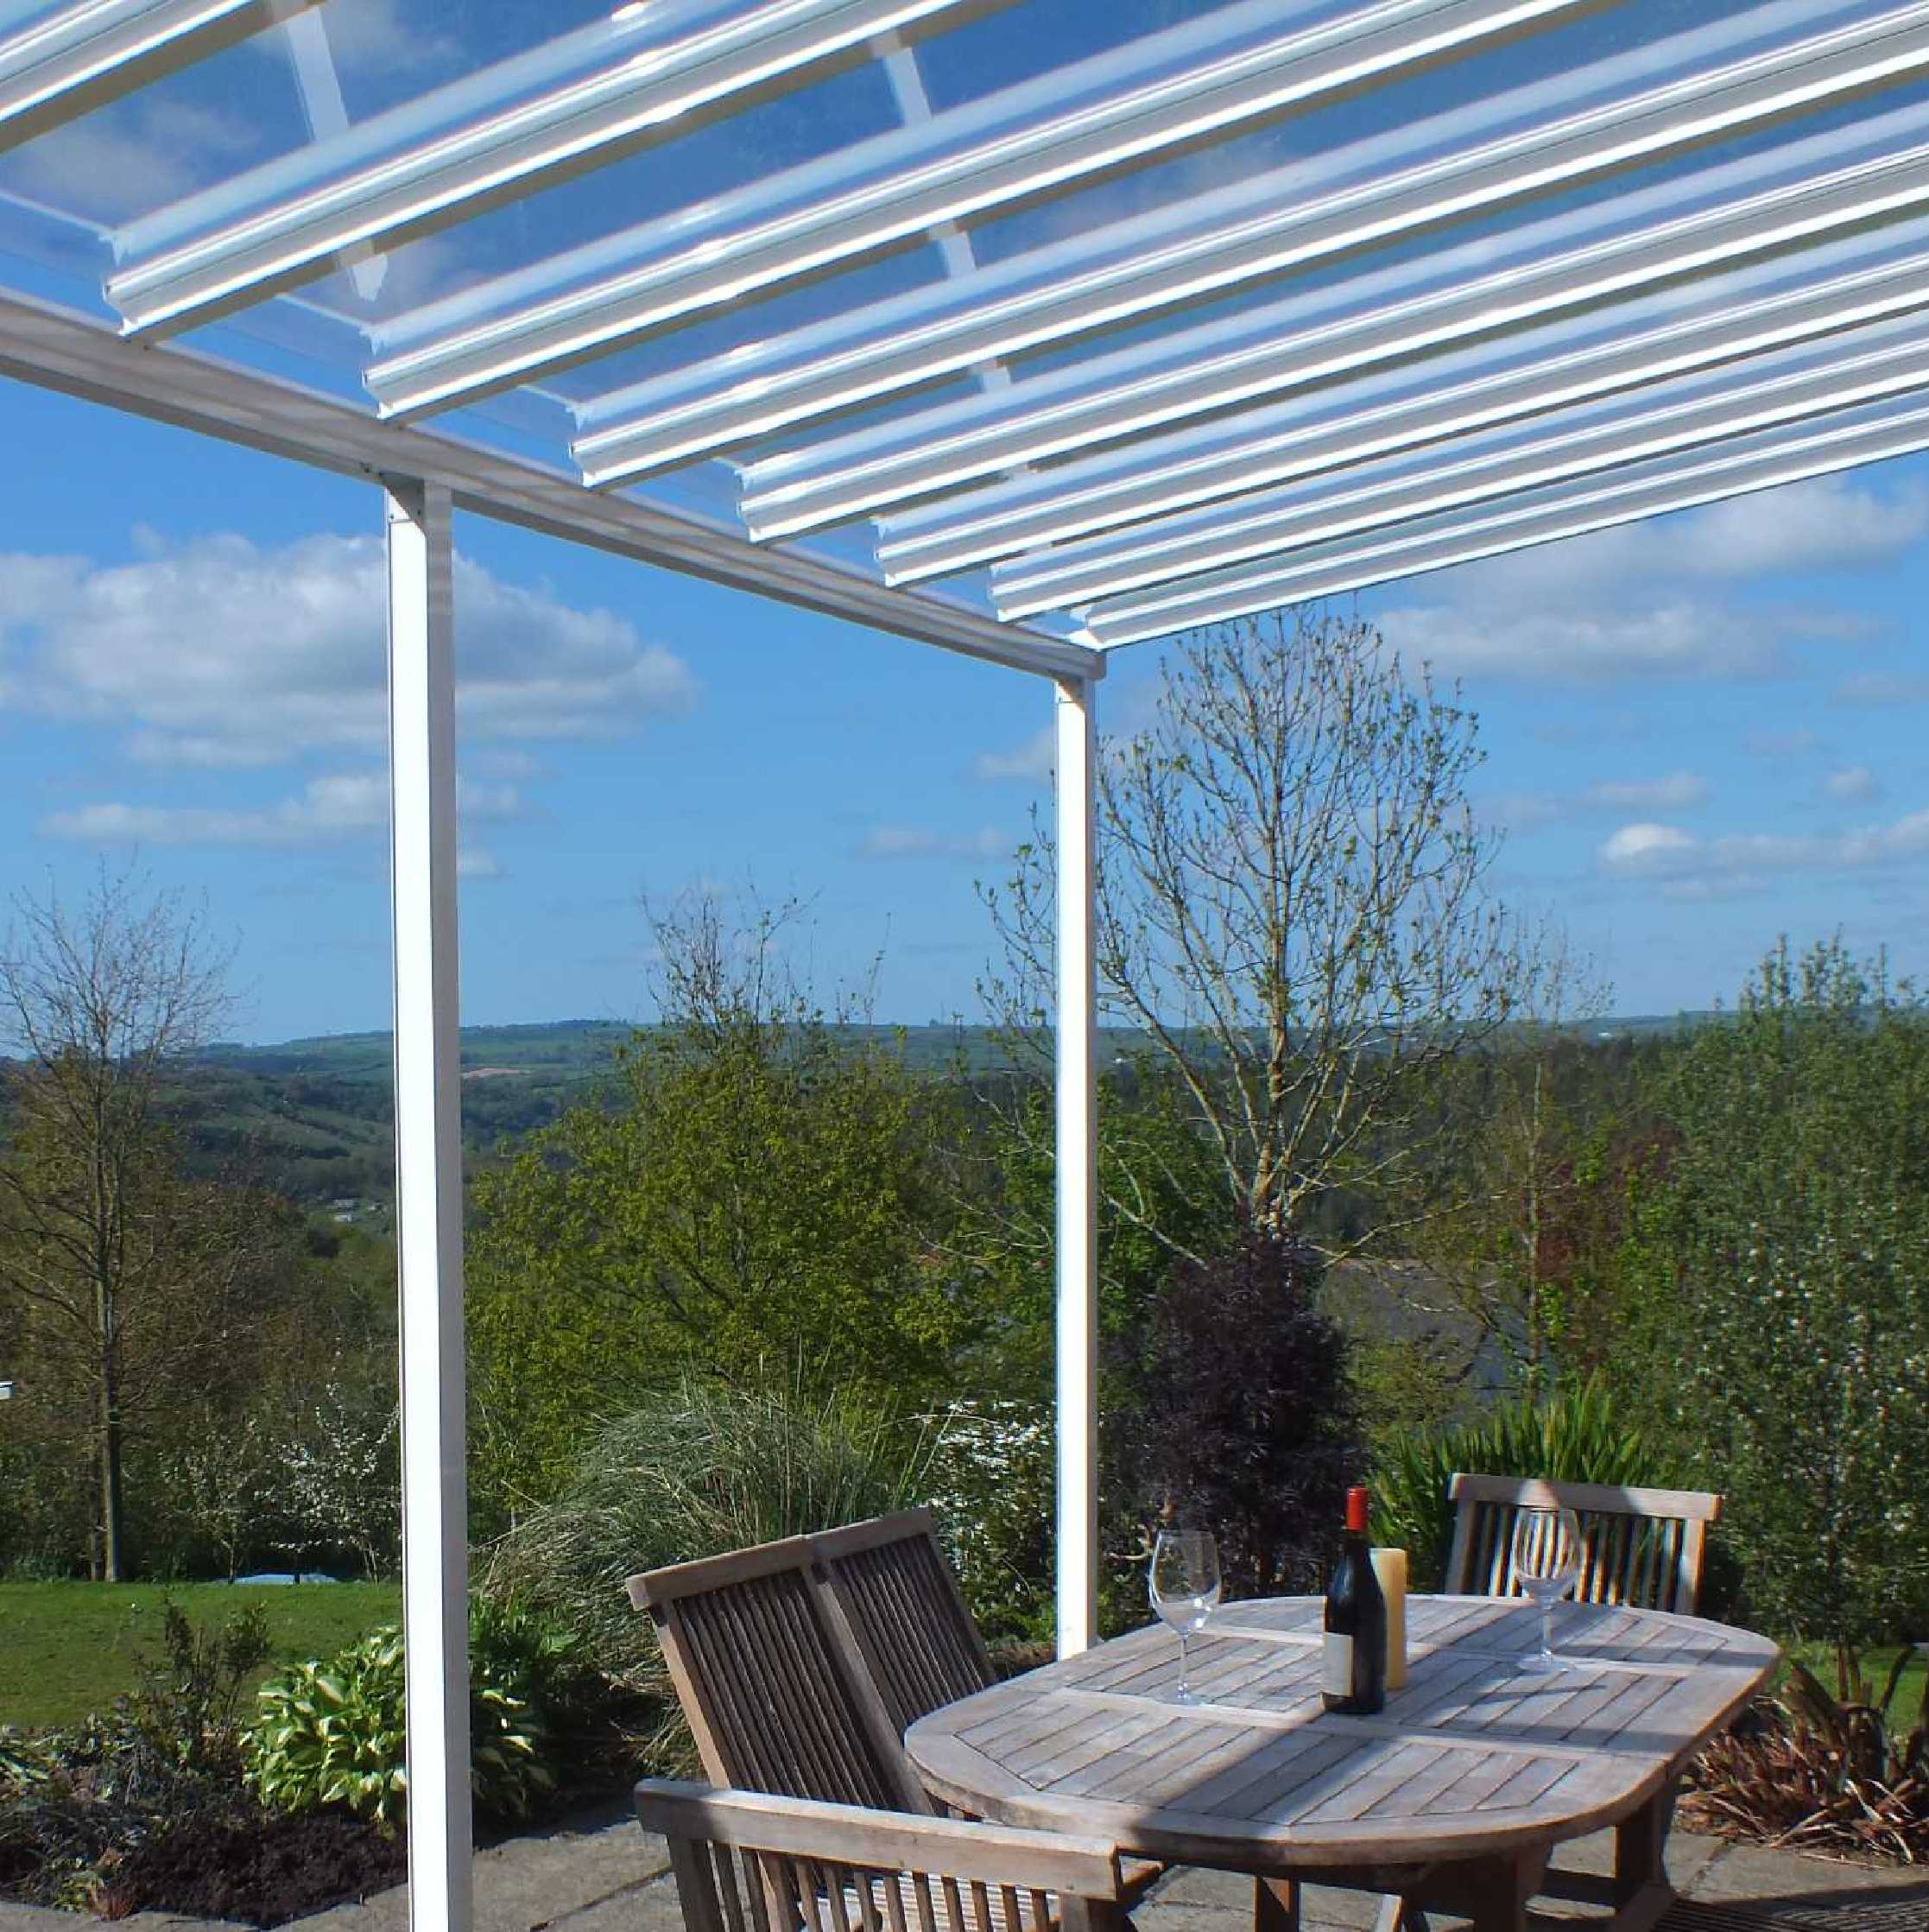 Buy Omega Smart Lean-To Canopy, White with 6mm Glass Clear Plate Polycarbonate Glazing - 9.8m (W) x 2.5m (P), (5) Supporting Posts online today